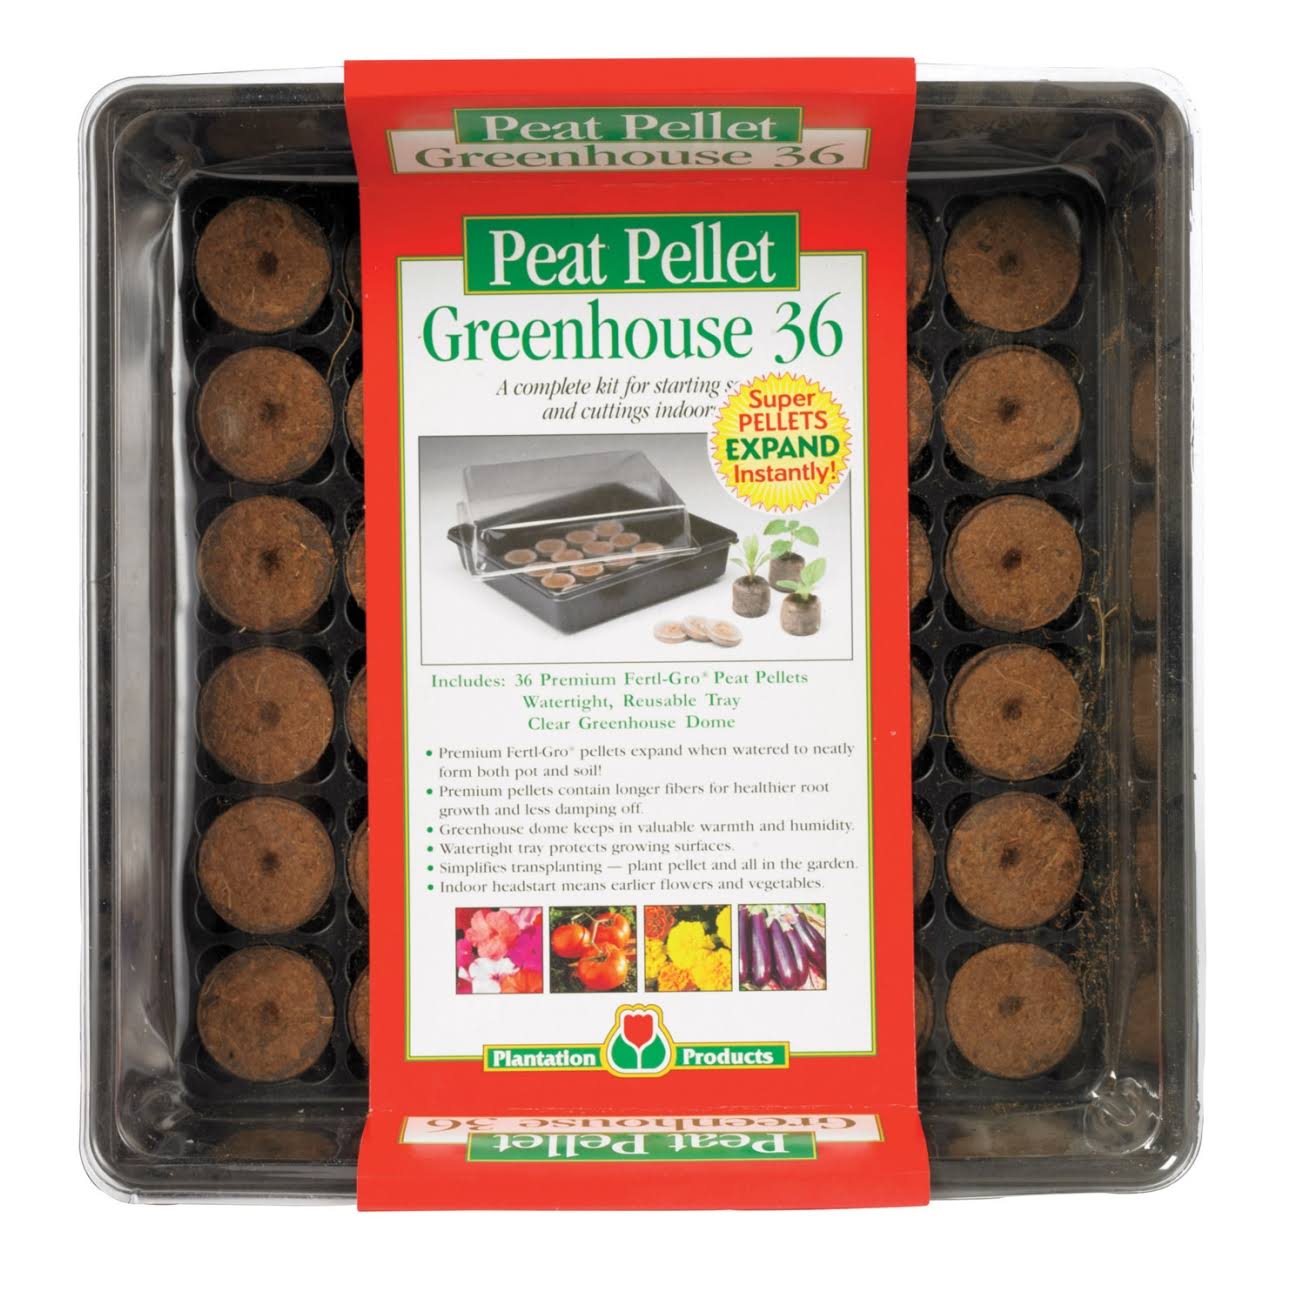 Peat Pellet Greenhouse Plant Seed Starter - 36 Count